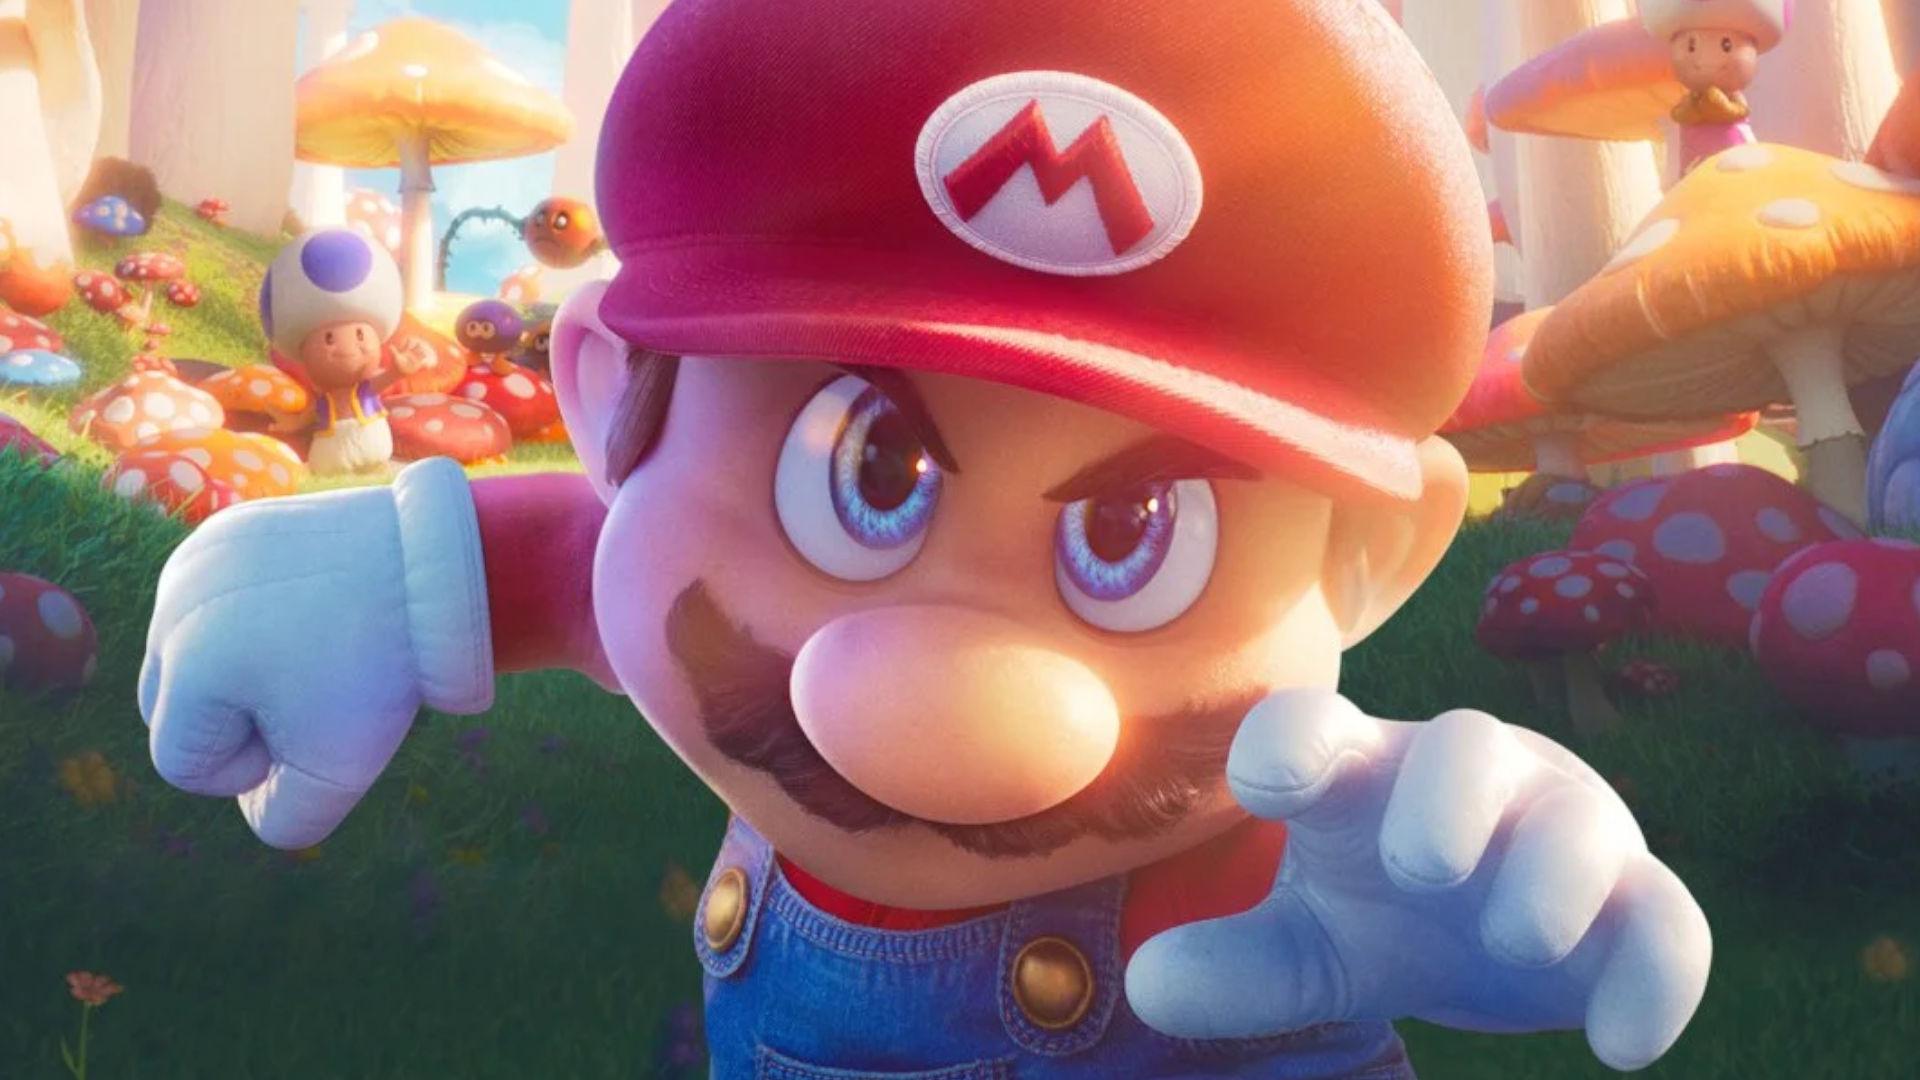 Mario Characters' Movie Vs. Game Designs - Which Do You Prefer?